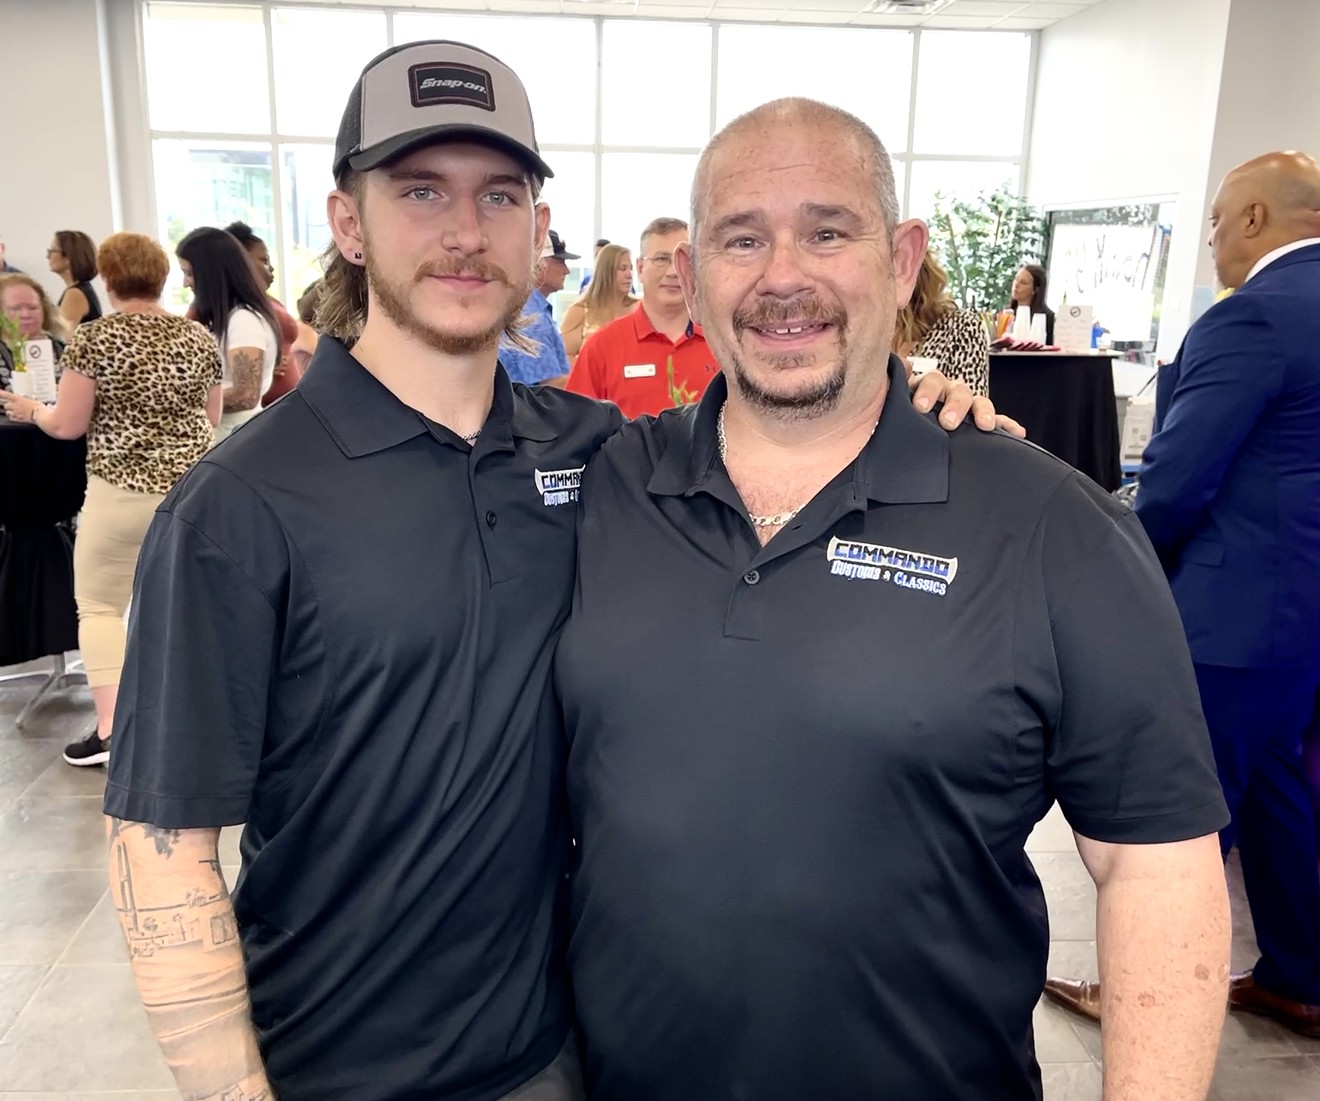 Step One Auto presents Local Hero Award to Team Savannah’s Chris O’Malley at 2021 Ram 1500 TRX Launch Event